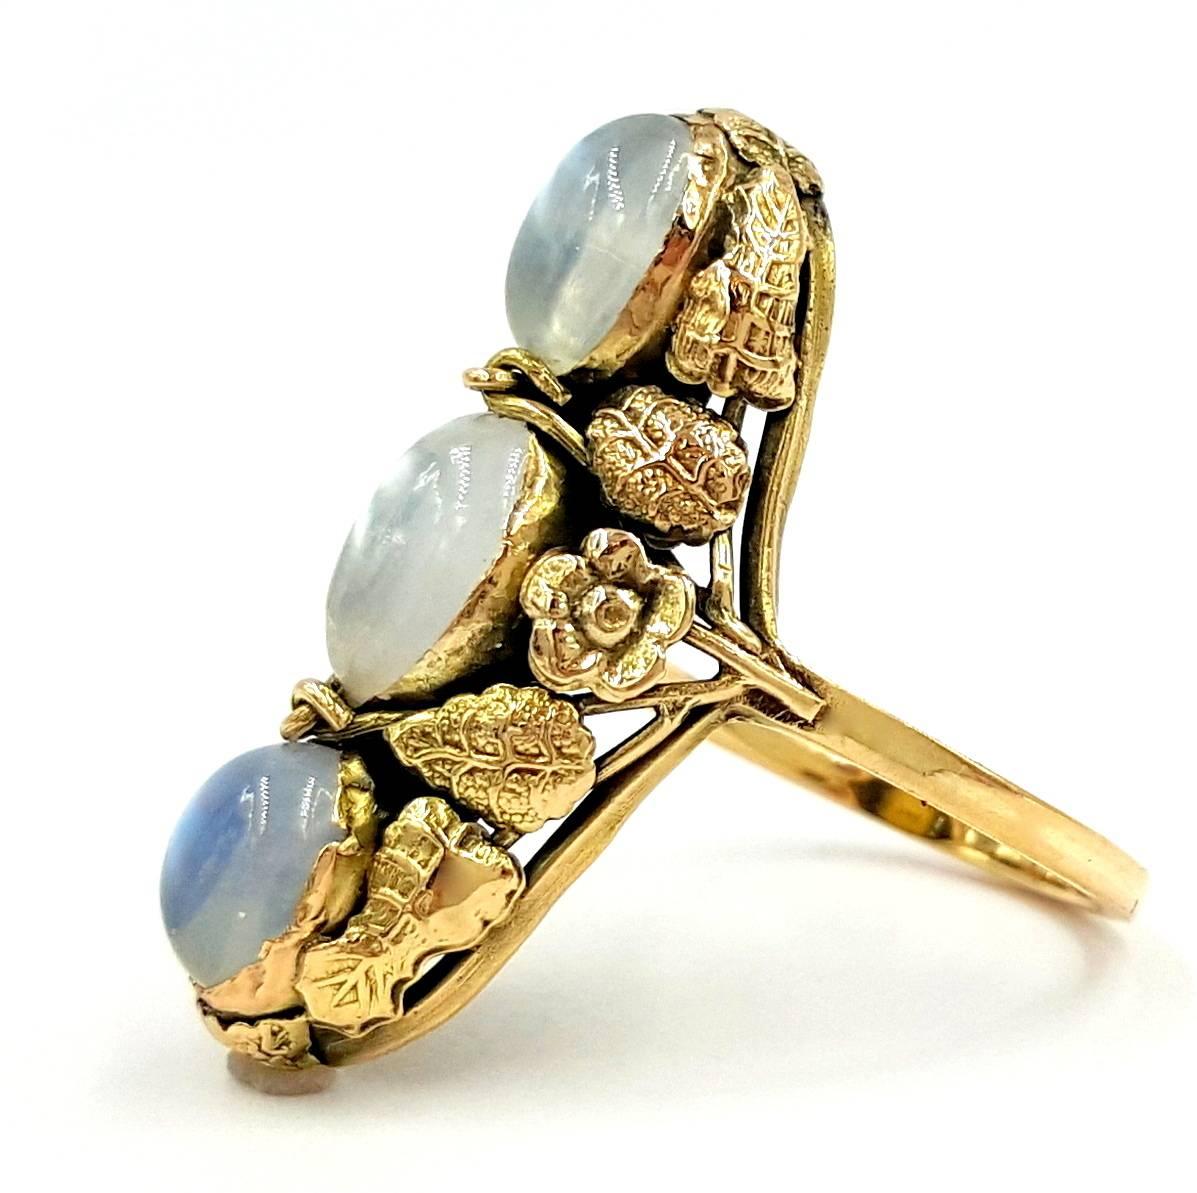 Here is some information on this absolutely stunning example of an Arts and Crafts Rare Moon Stone Ring.

Arts and Crafts jewelry (1894–1923)

http://www.gia.edu/images/12047_why_1355960841144.png
Due to the Industrial Revolution, many jewelry